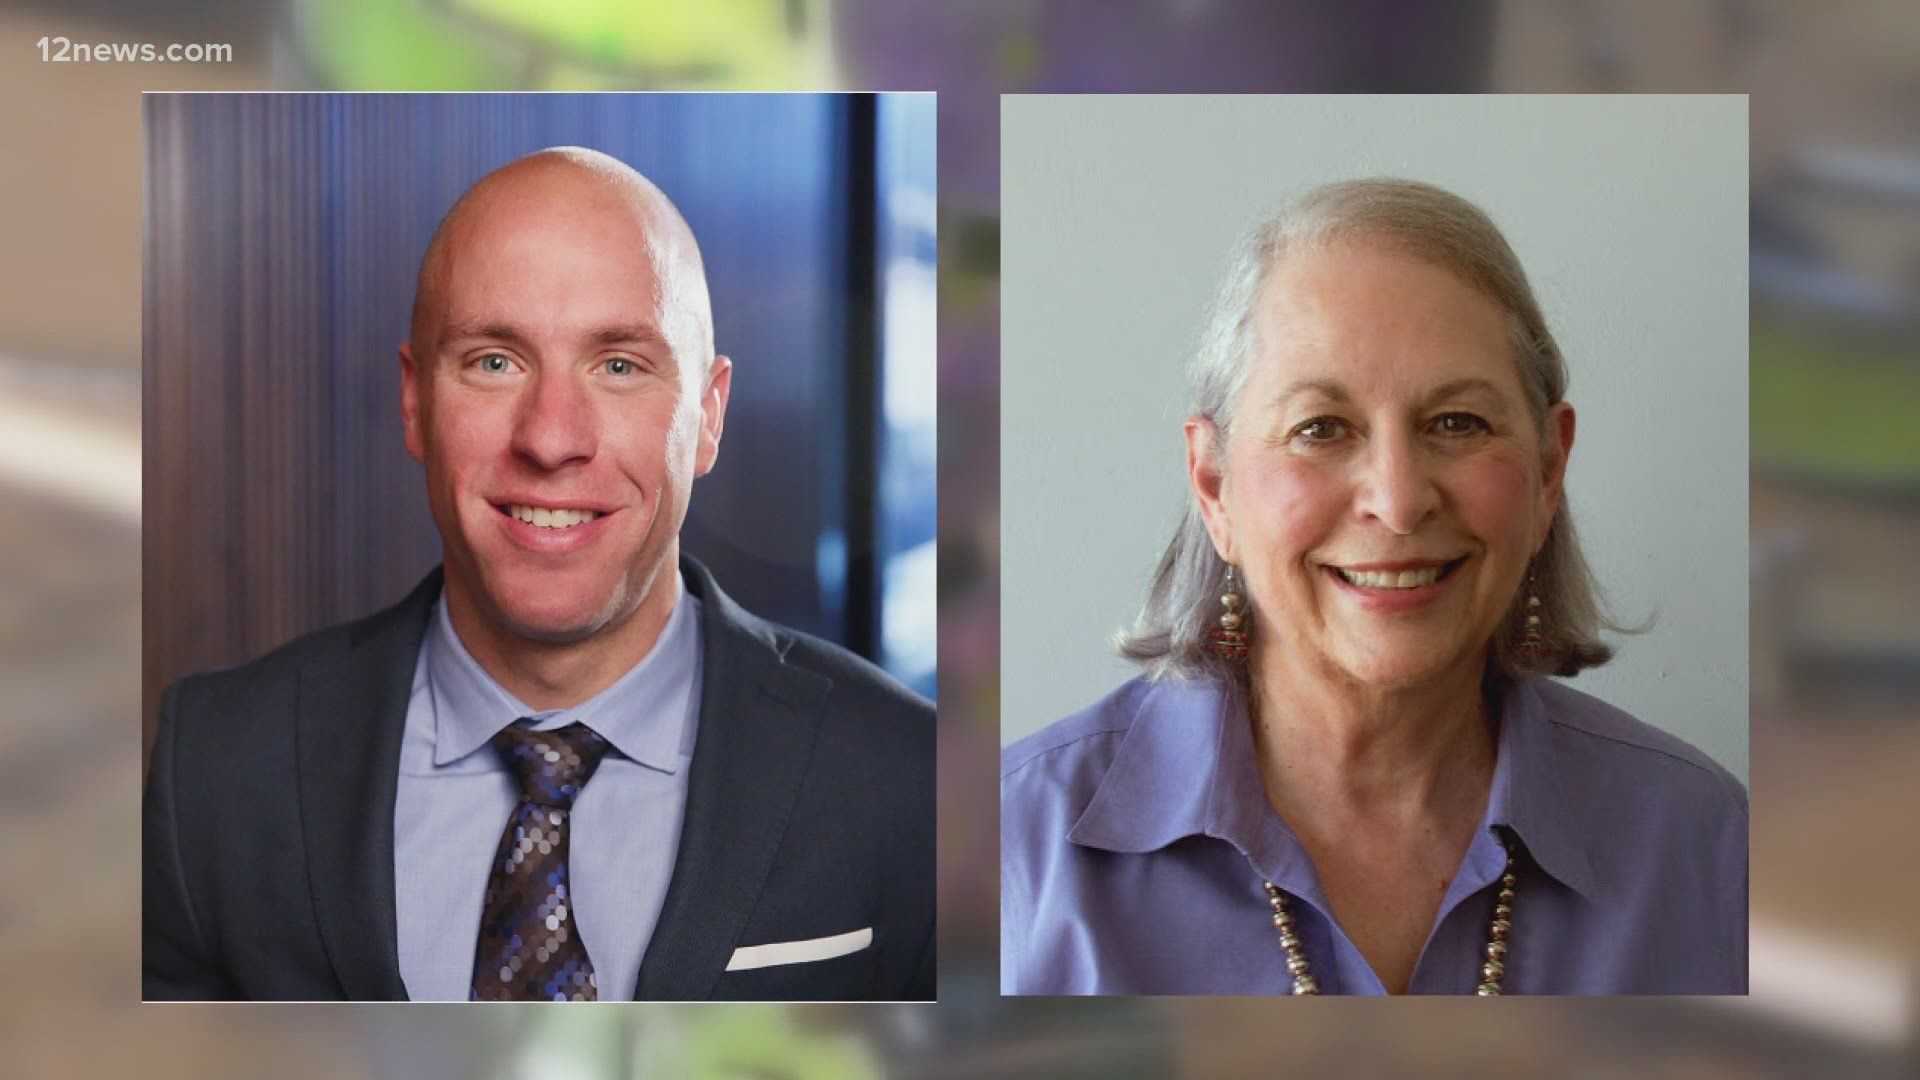 Two individuals will be recognized for their efforts in improving the quality of life in Phoenix. Dr. Sheila Harris and Dominic Papa will be honored Thursday.